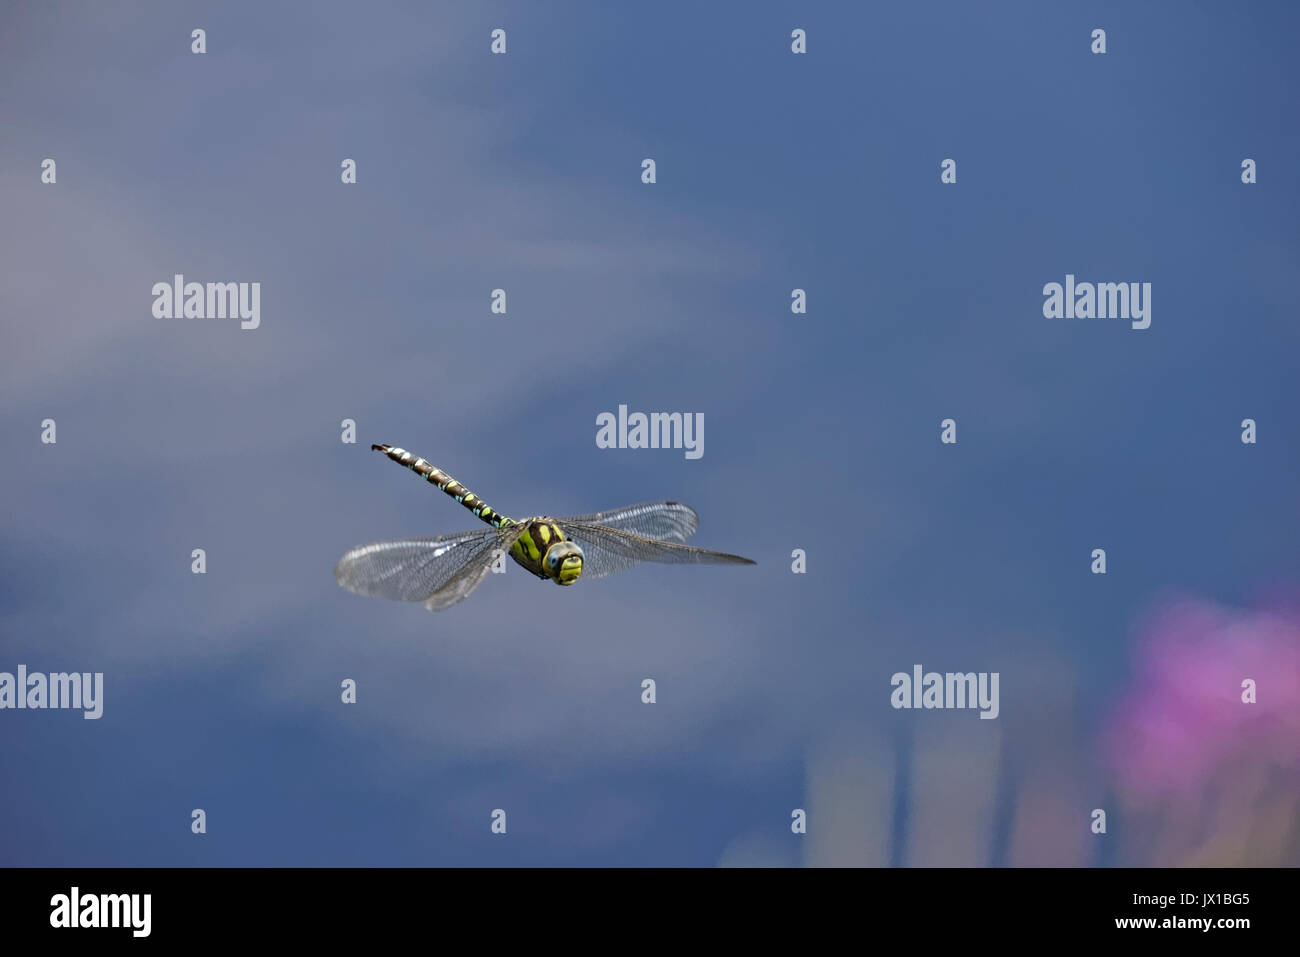 The dragonfly is flying above the grassy pond. Stock Photo